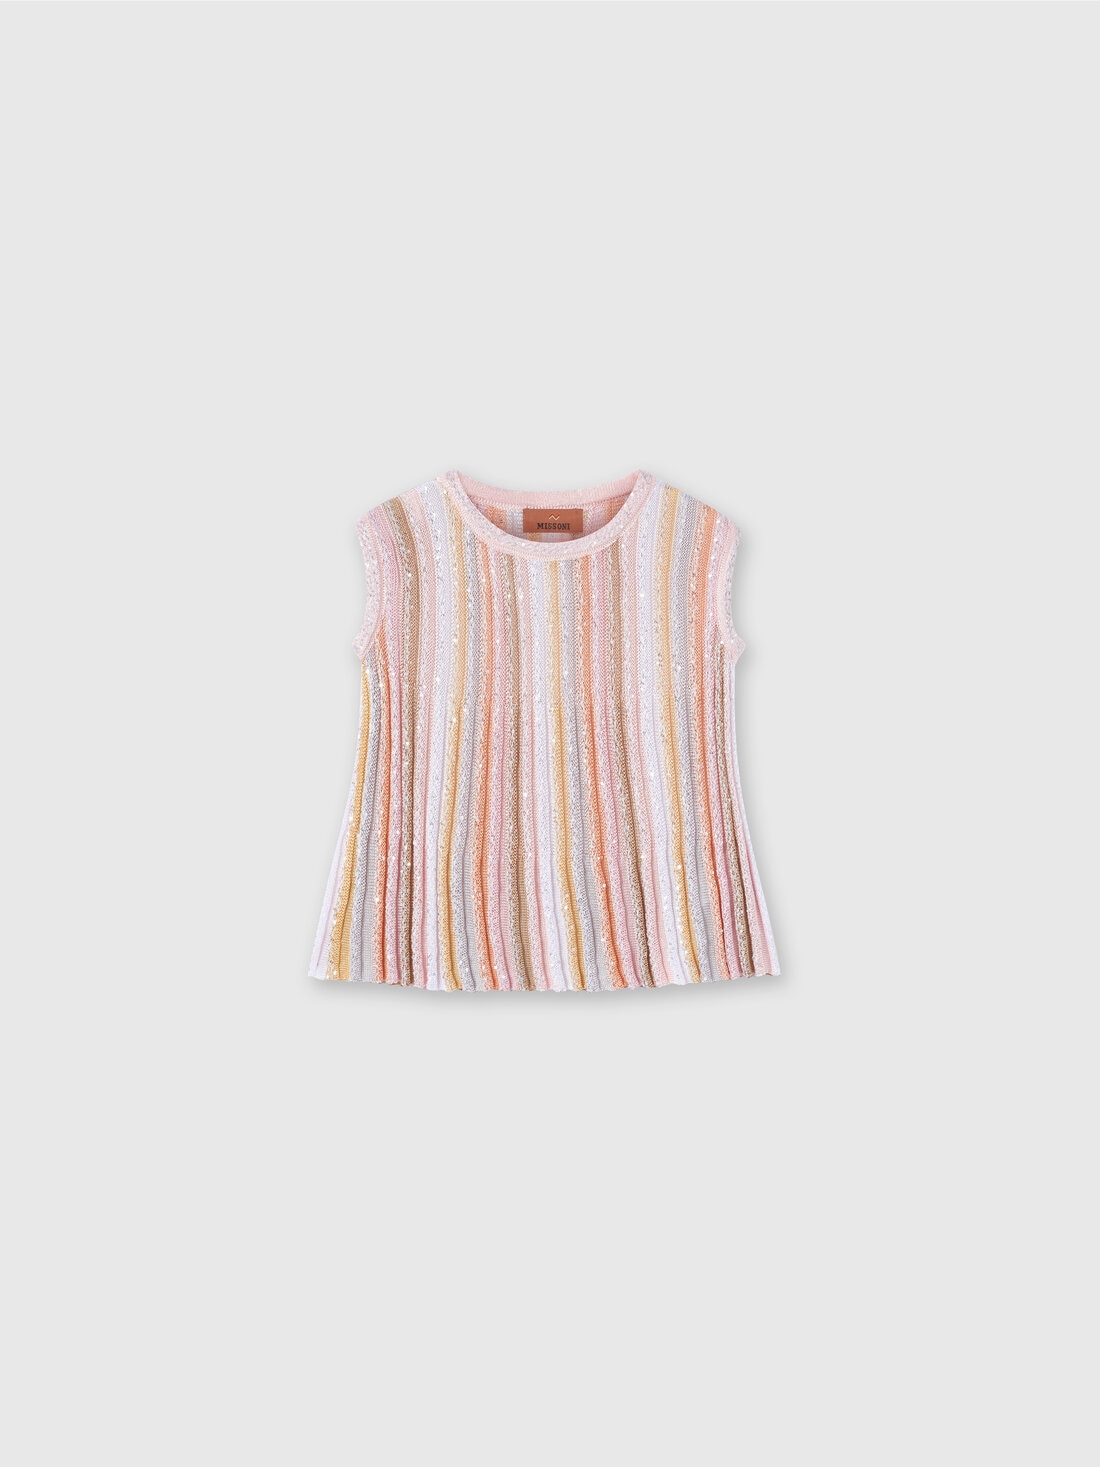 Sleeveless top in pleated viscose knit with sequins, Multicoloured  - KS24SN01BV00FXSM923 - 0